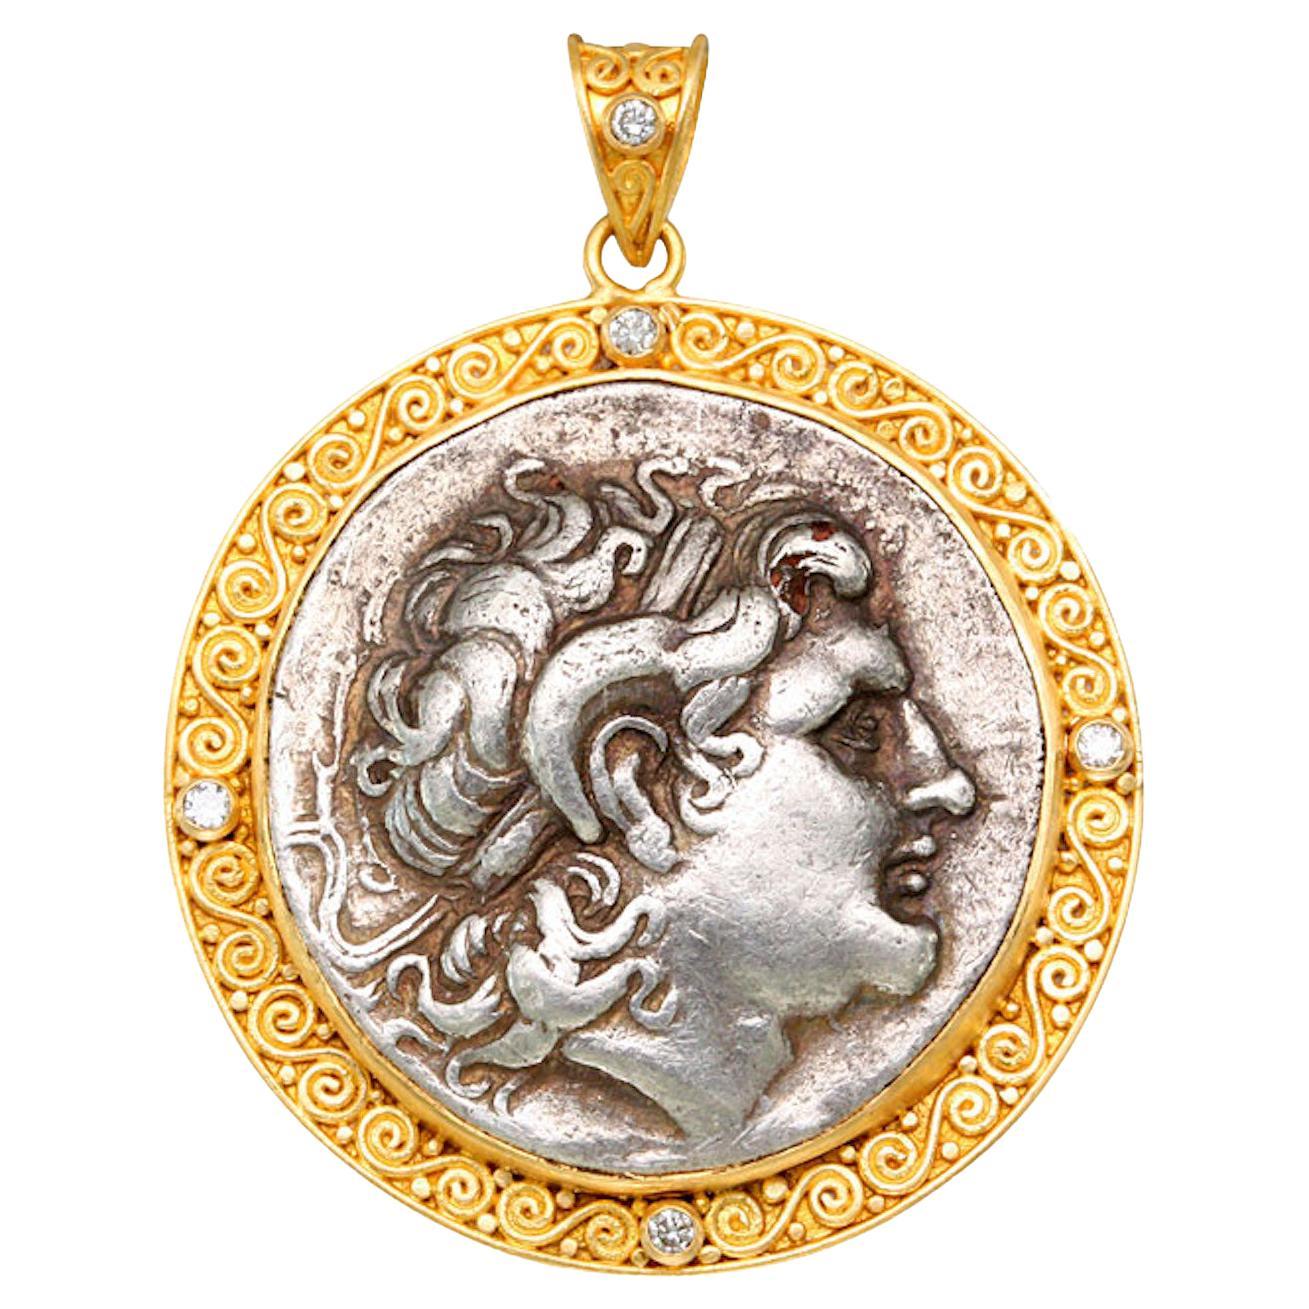 Ancient Greek 3rd Century BC Alexander the Great Coin Diamonds 22K Gold Pendant For Sale